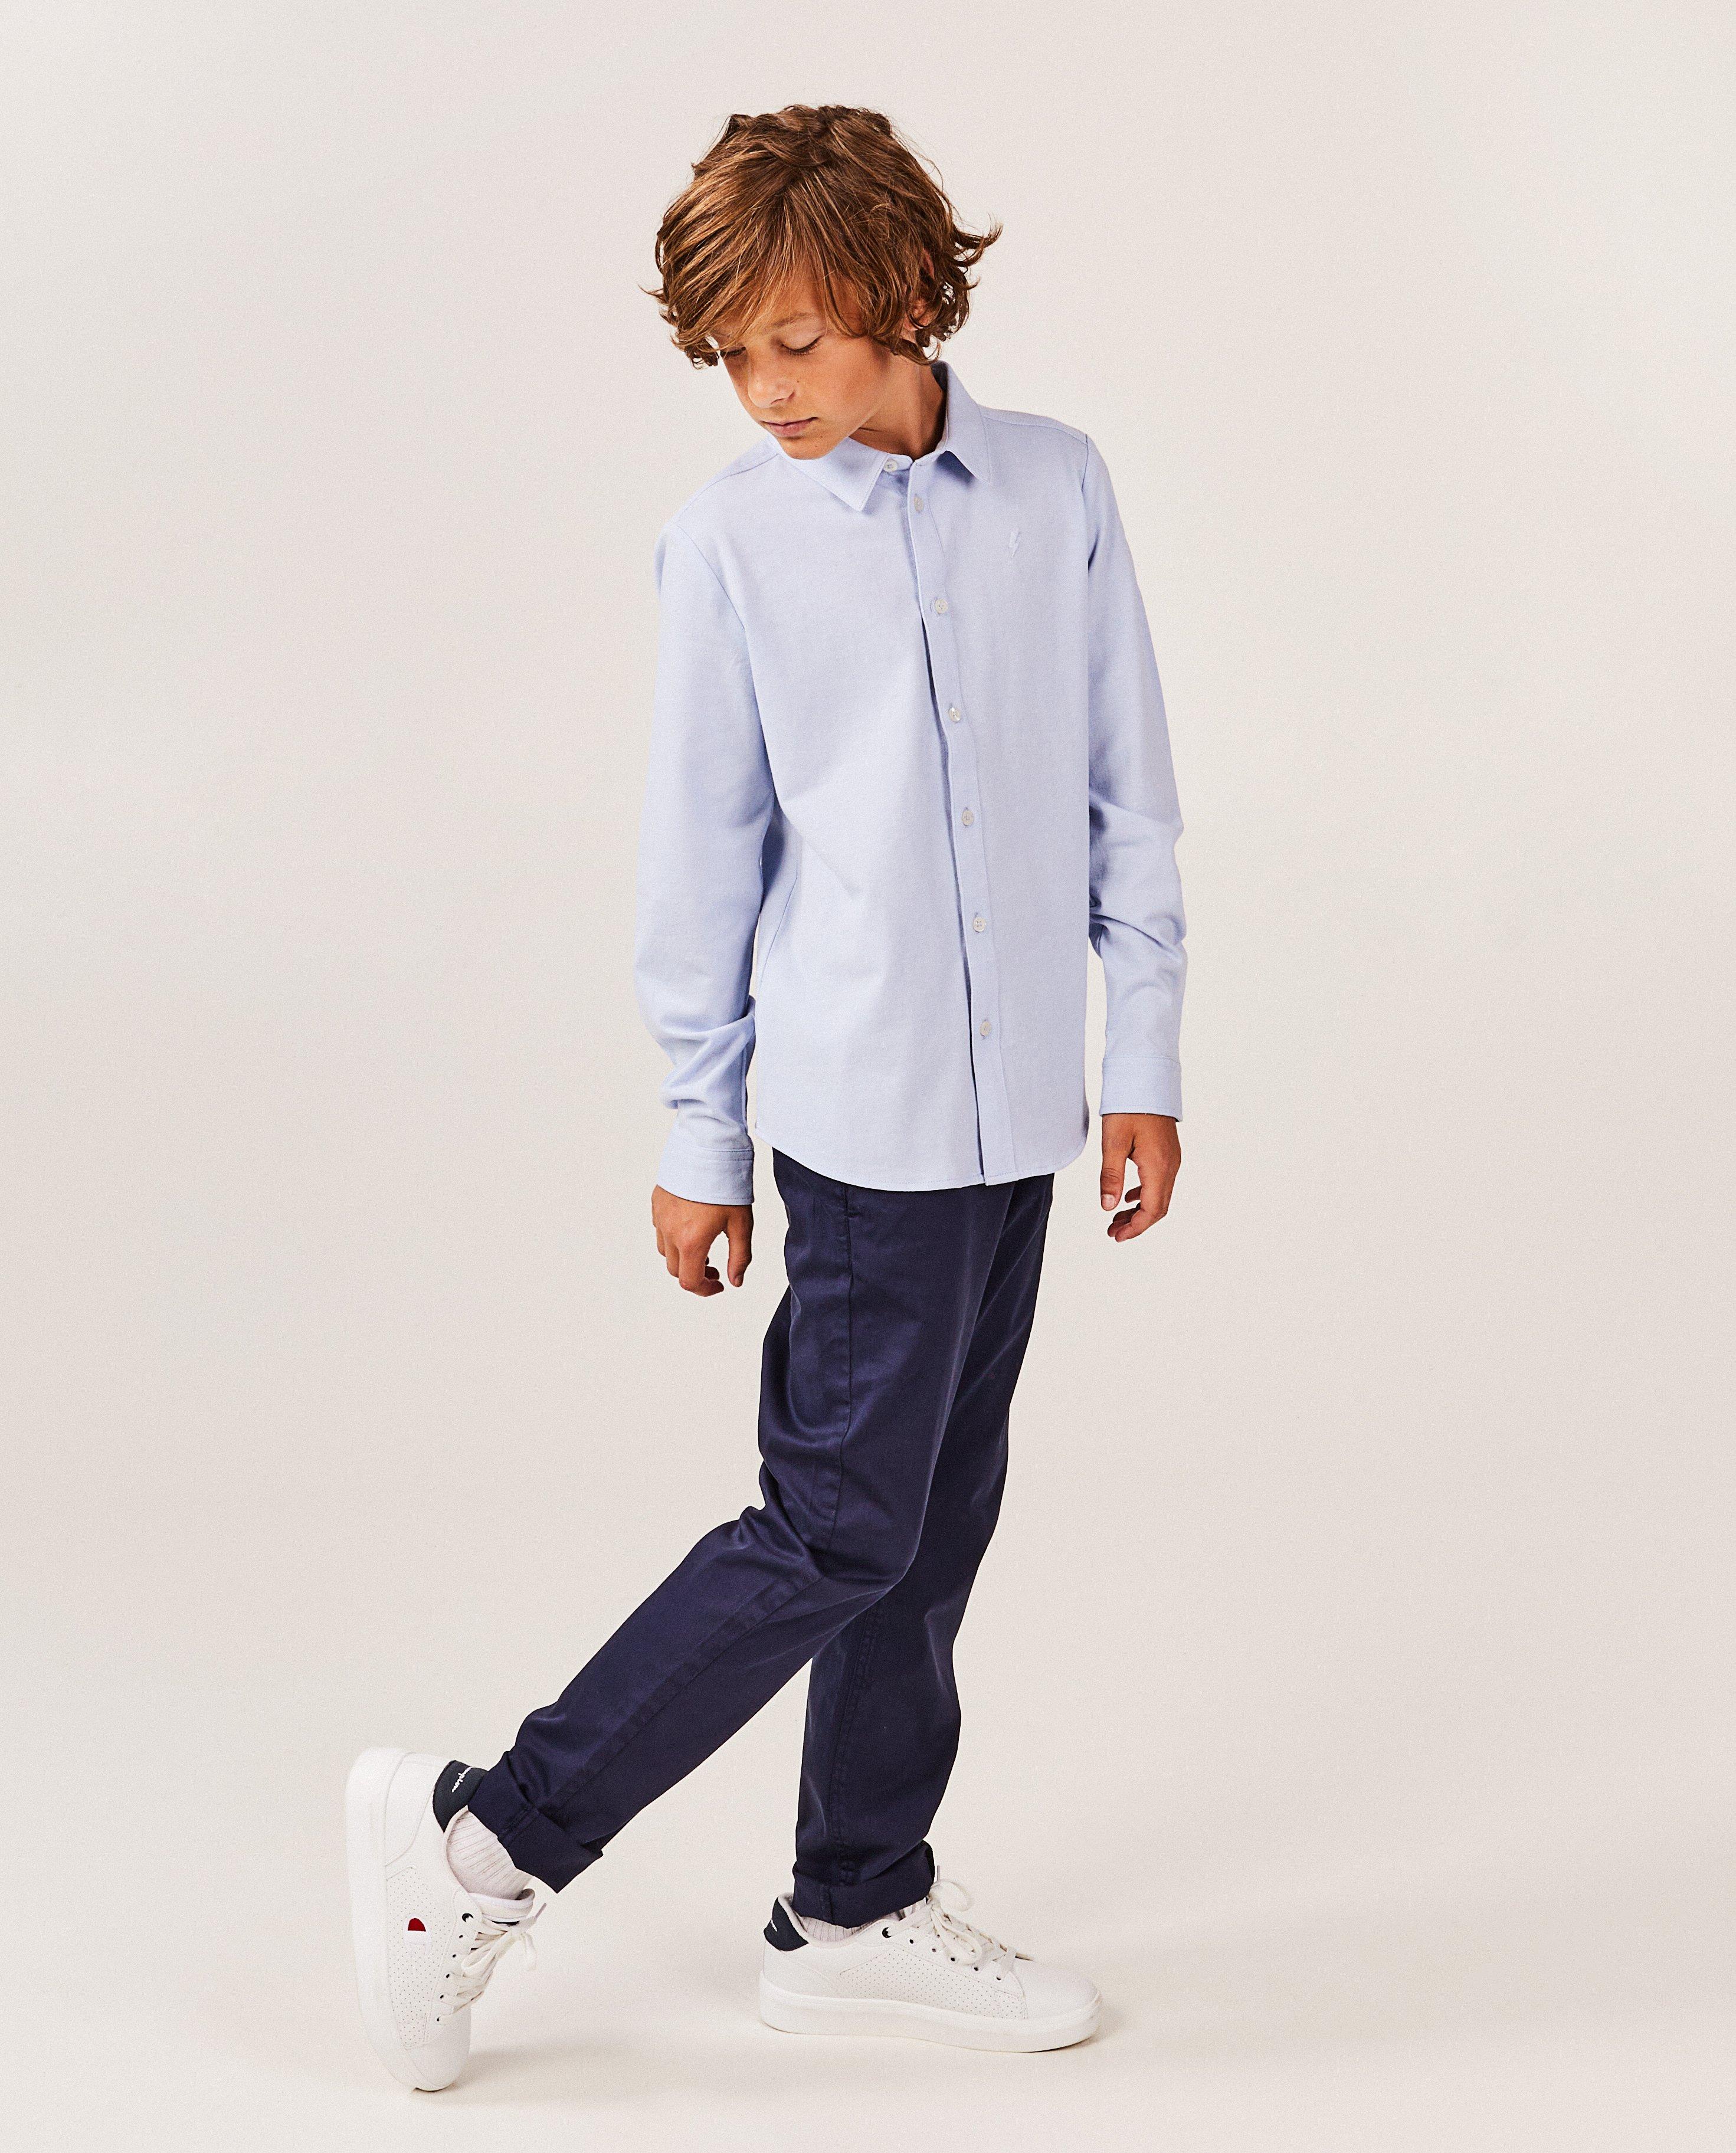 Chemise bleu clair avec broderie - null - Fish & Chips